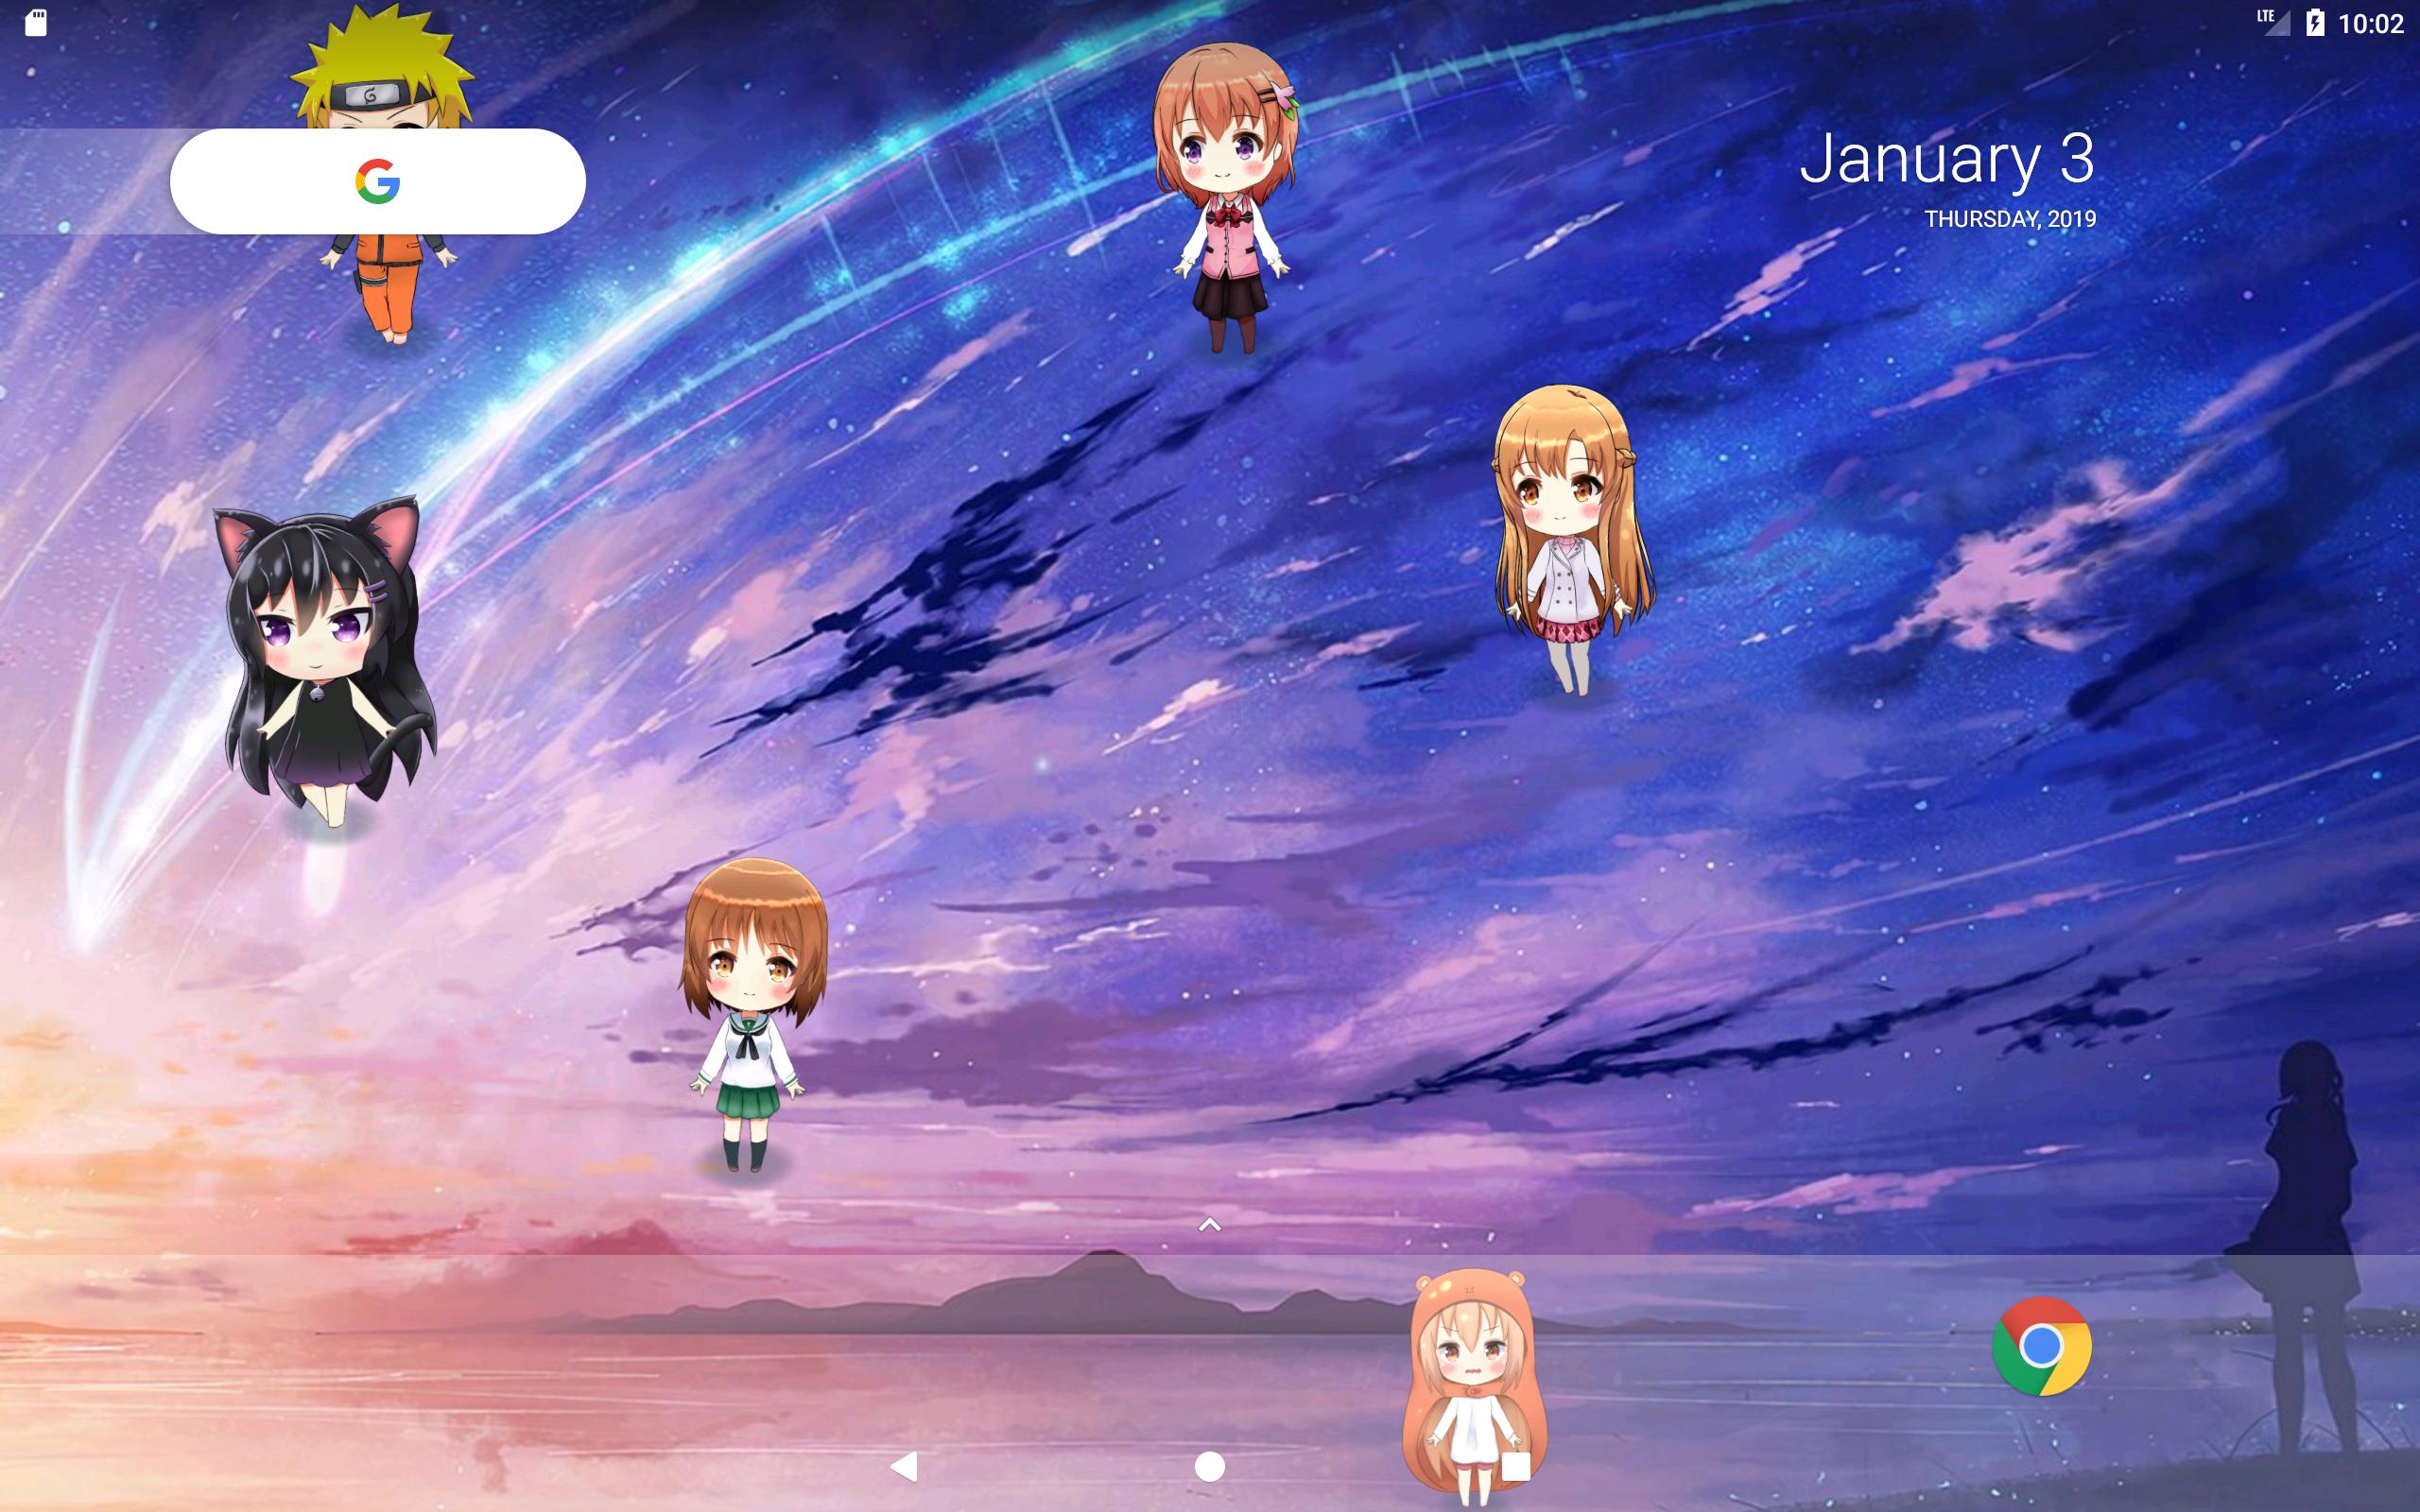 Lively Anime Live Wallpaper for Android - APK Download